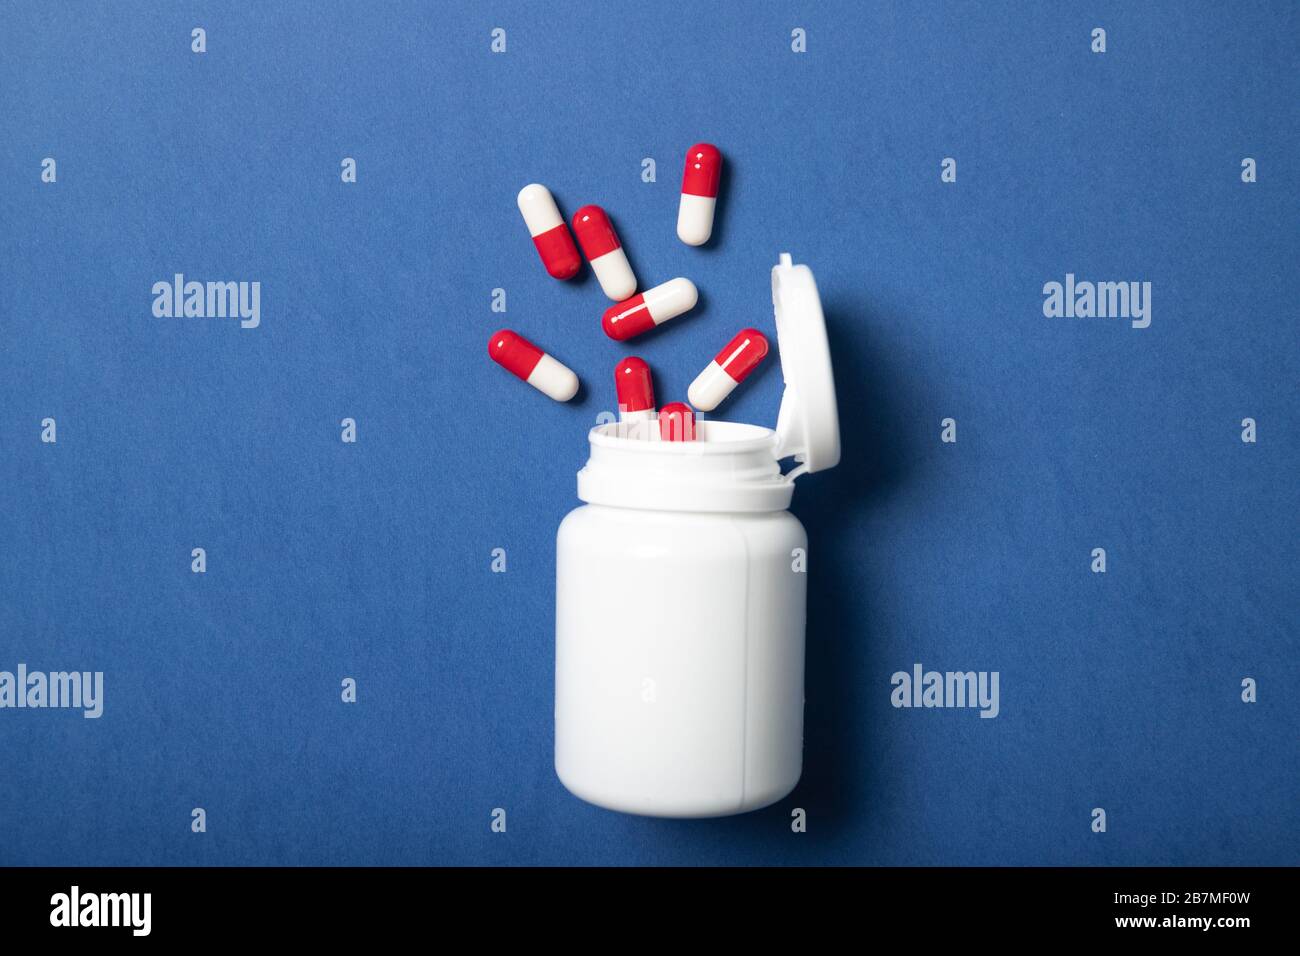 Jar with pills on a blue background. Concept of medicine and health Stock Photo